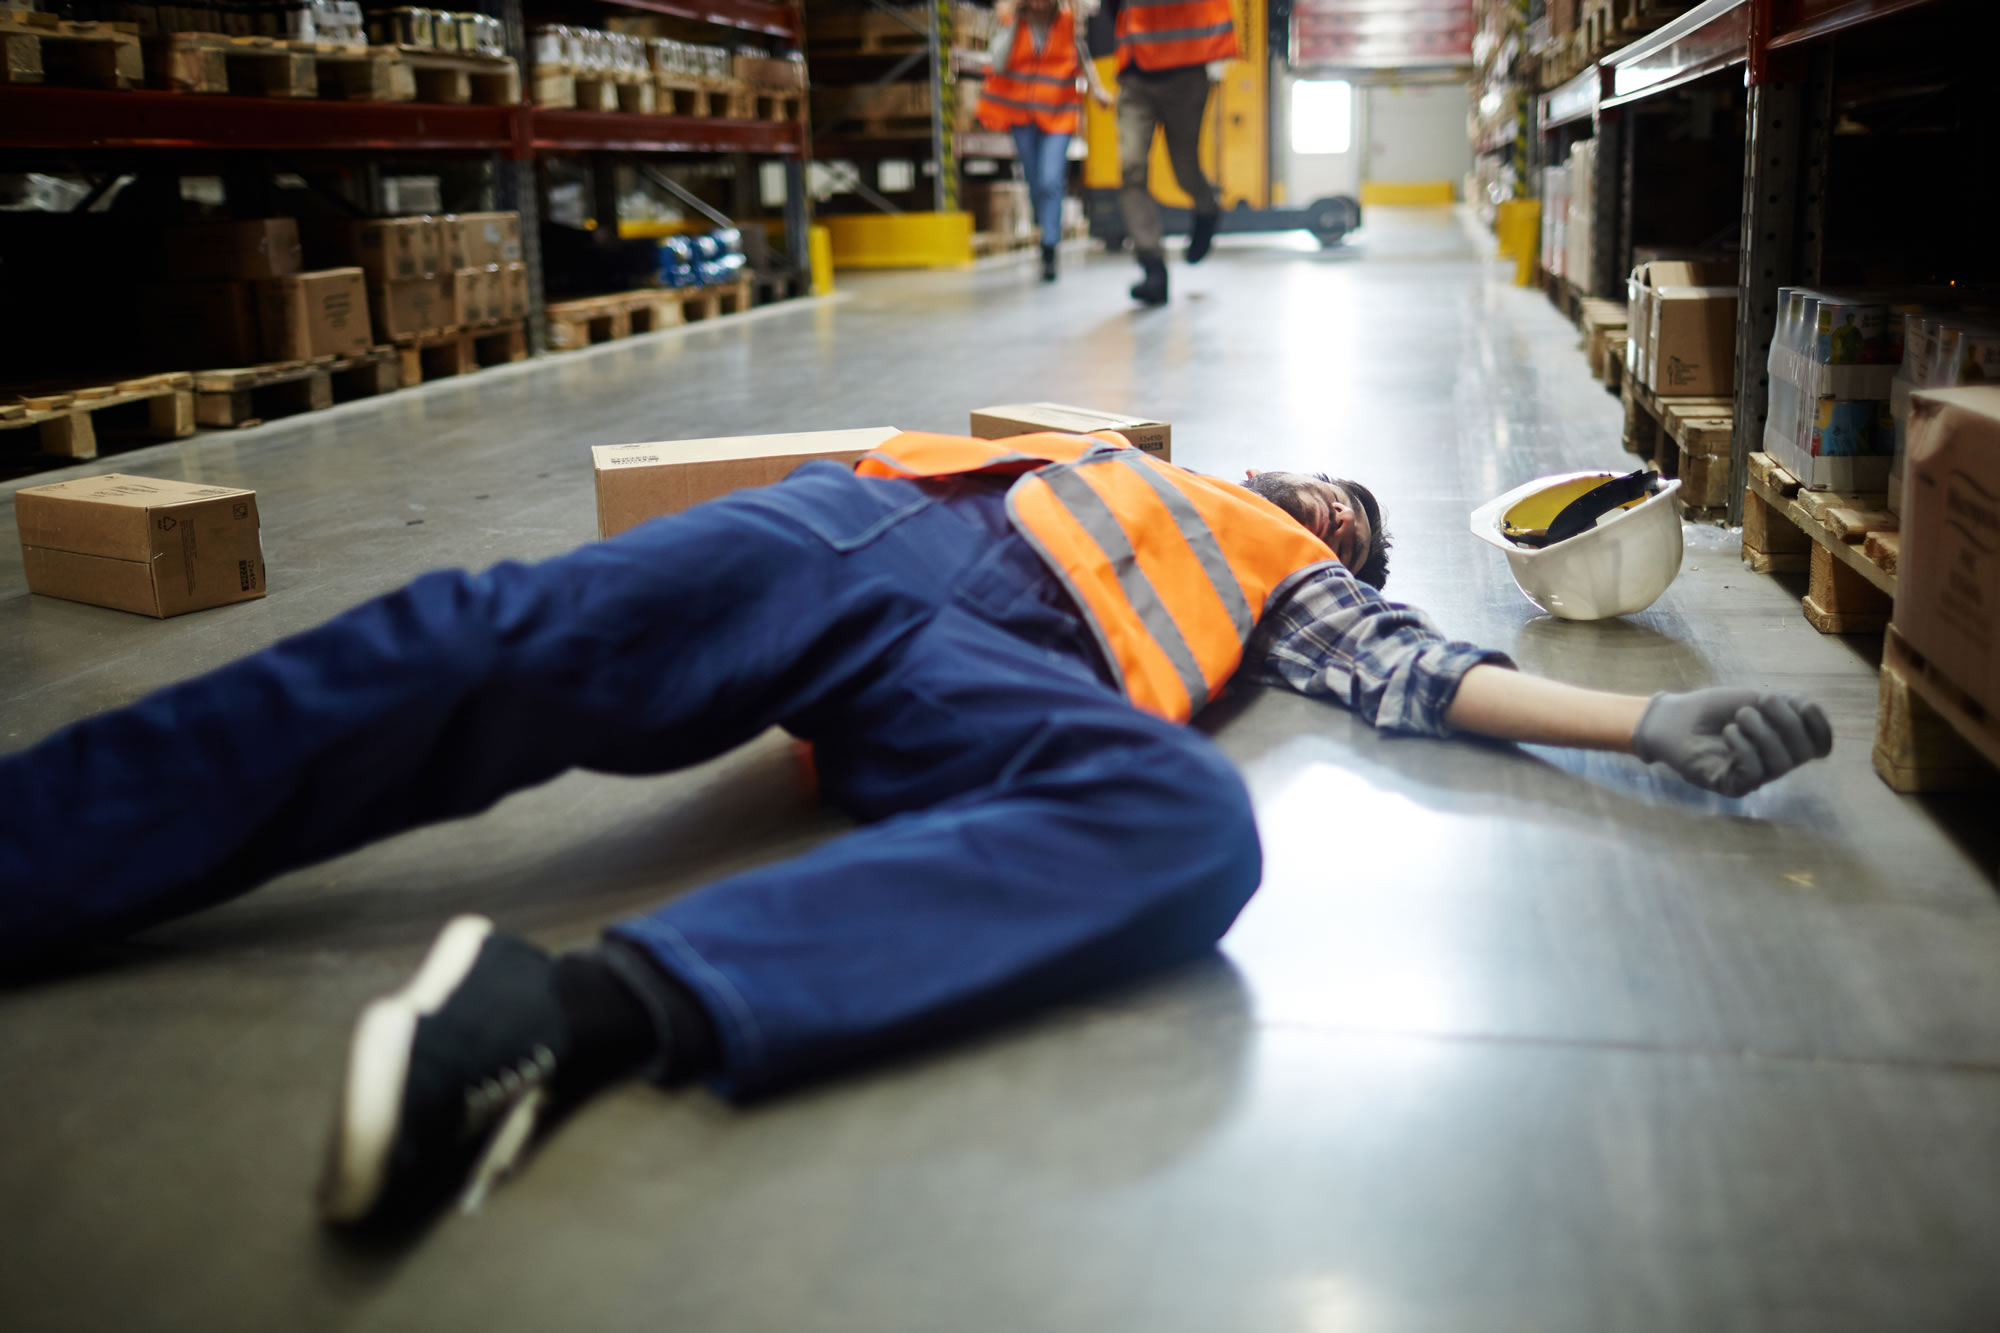 Accident at work - Workplace Slip, Trip or Fall - slip and trip hazards in the workplace, suing employer for negligence